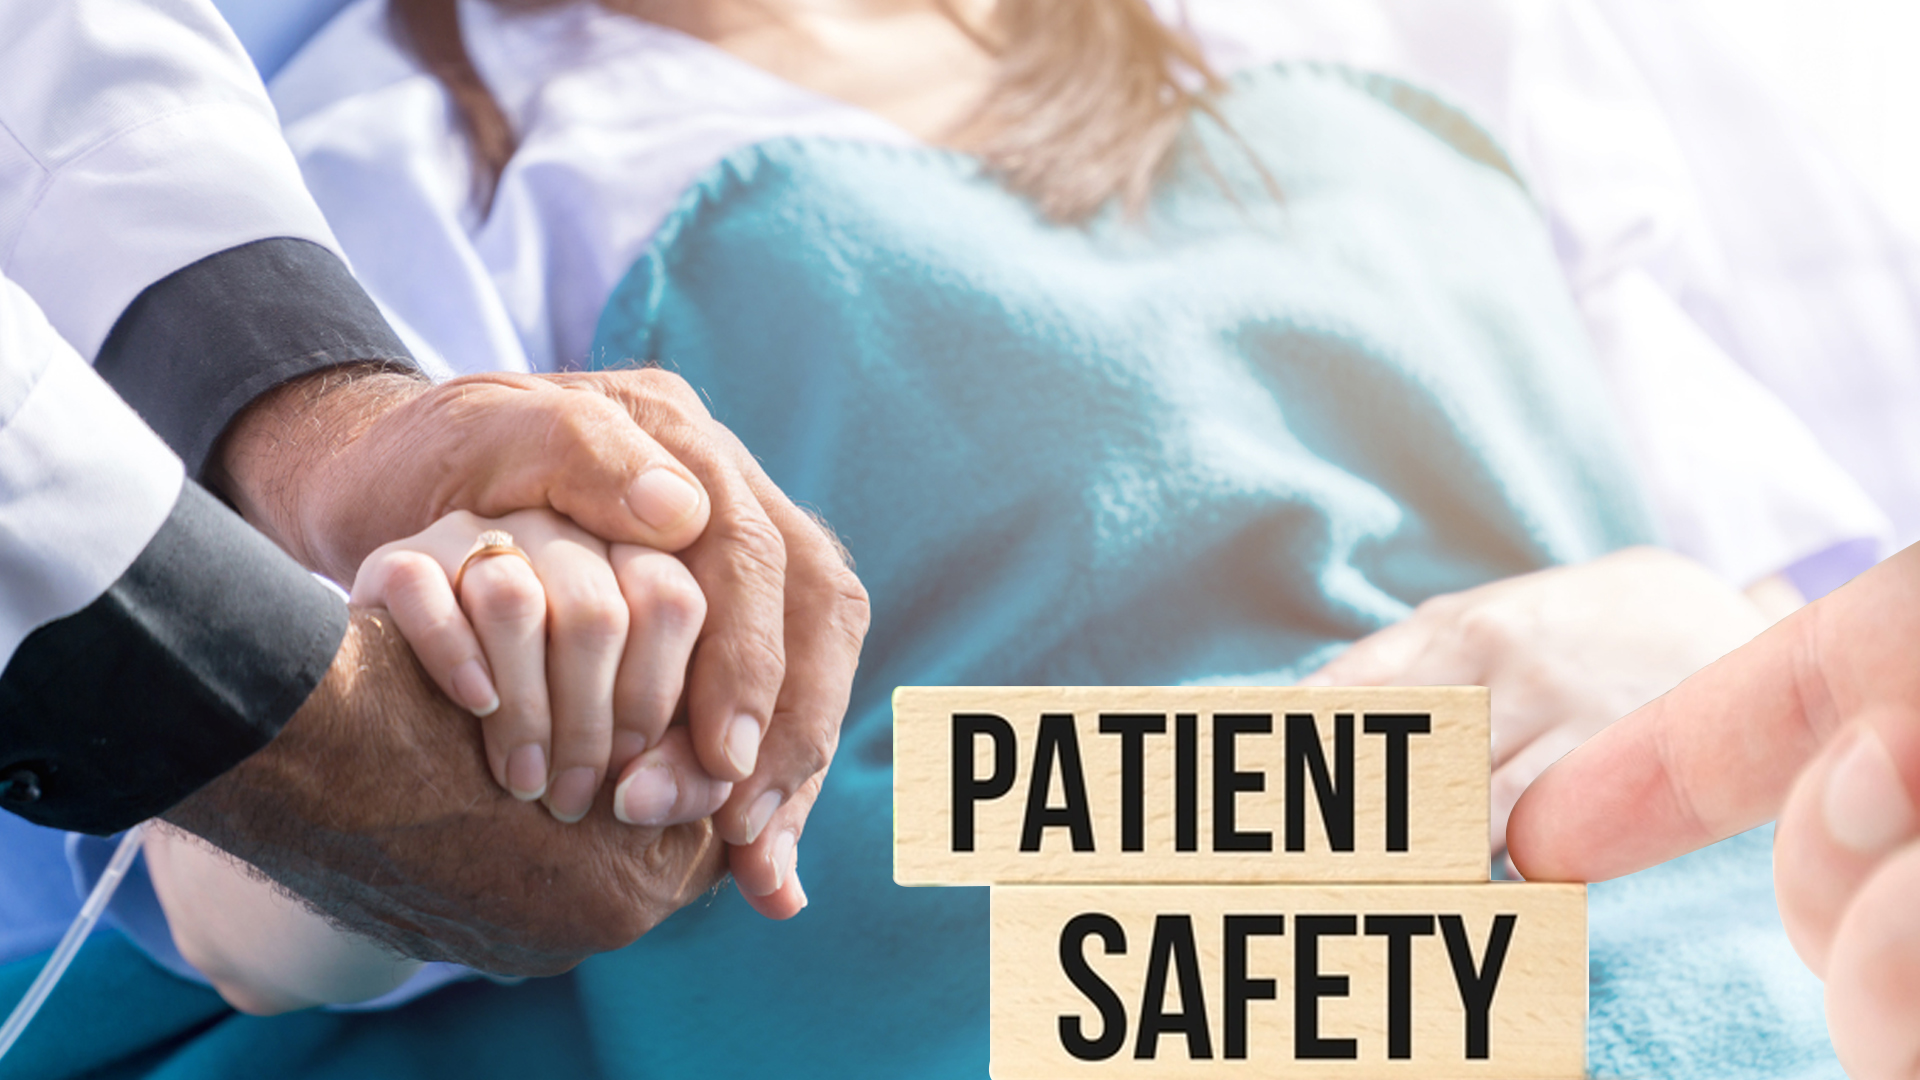 The Growth and Halt of Patient Safety